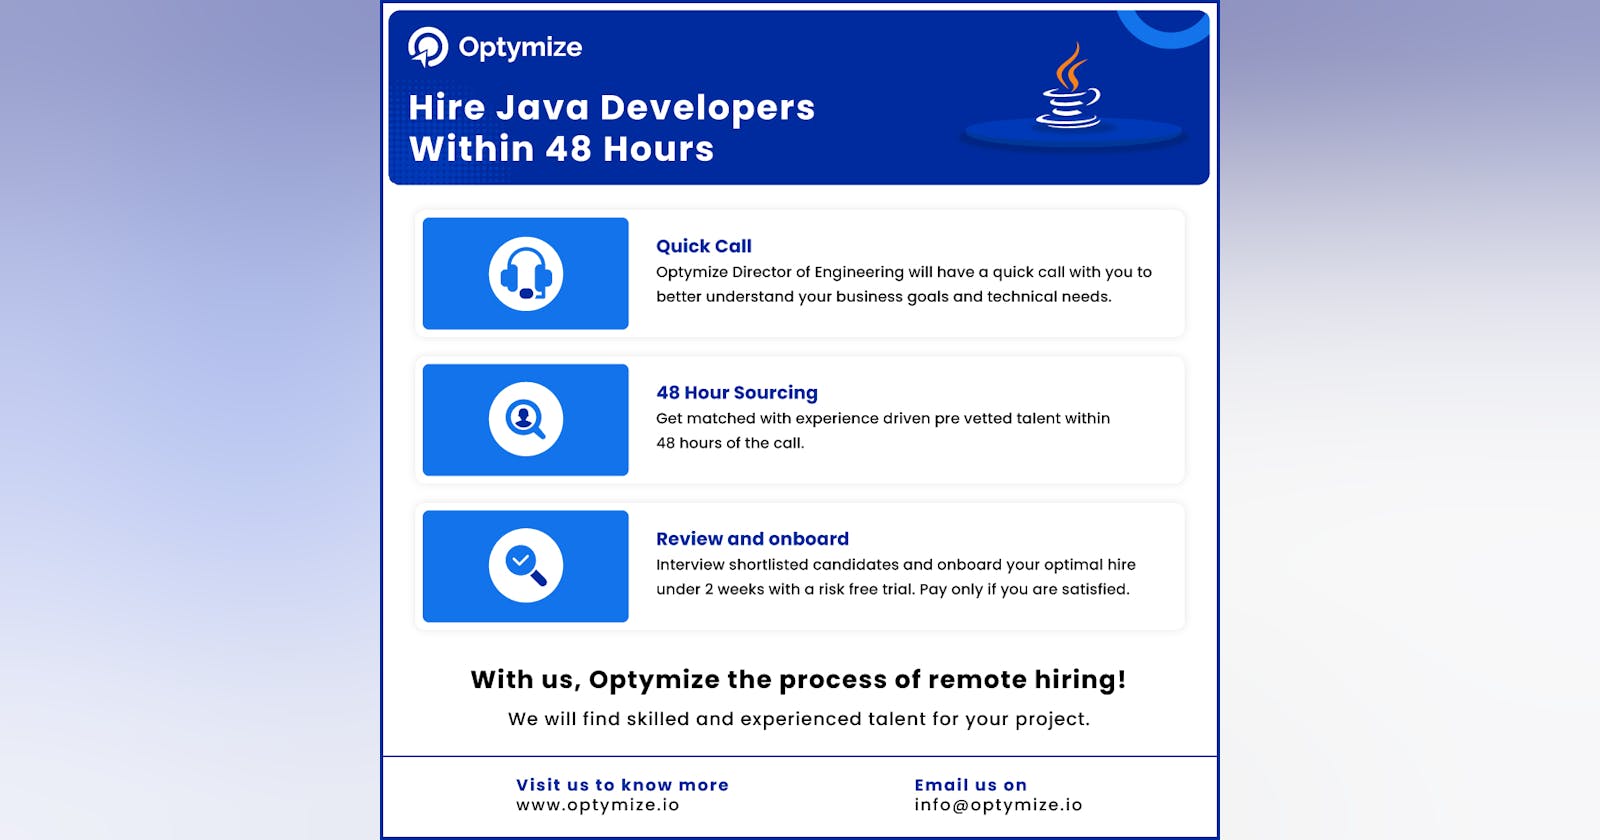 Hire the top 1% of 1 million + Java developers using Optymize’s Intelligent Talent Cloud